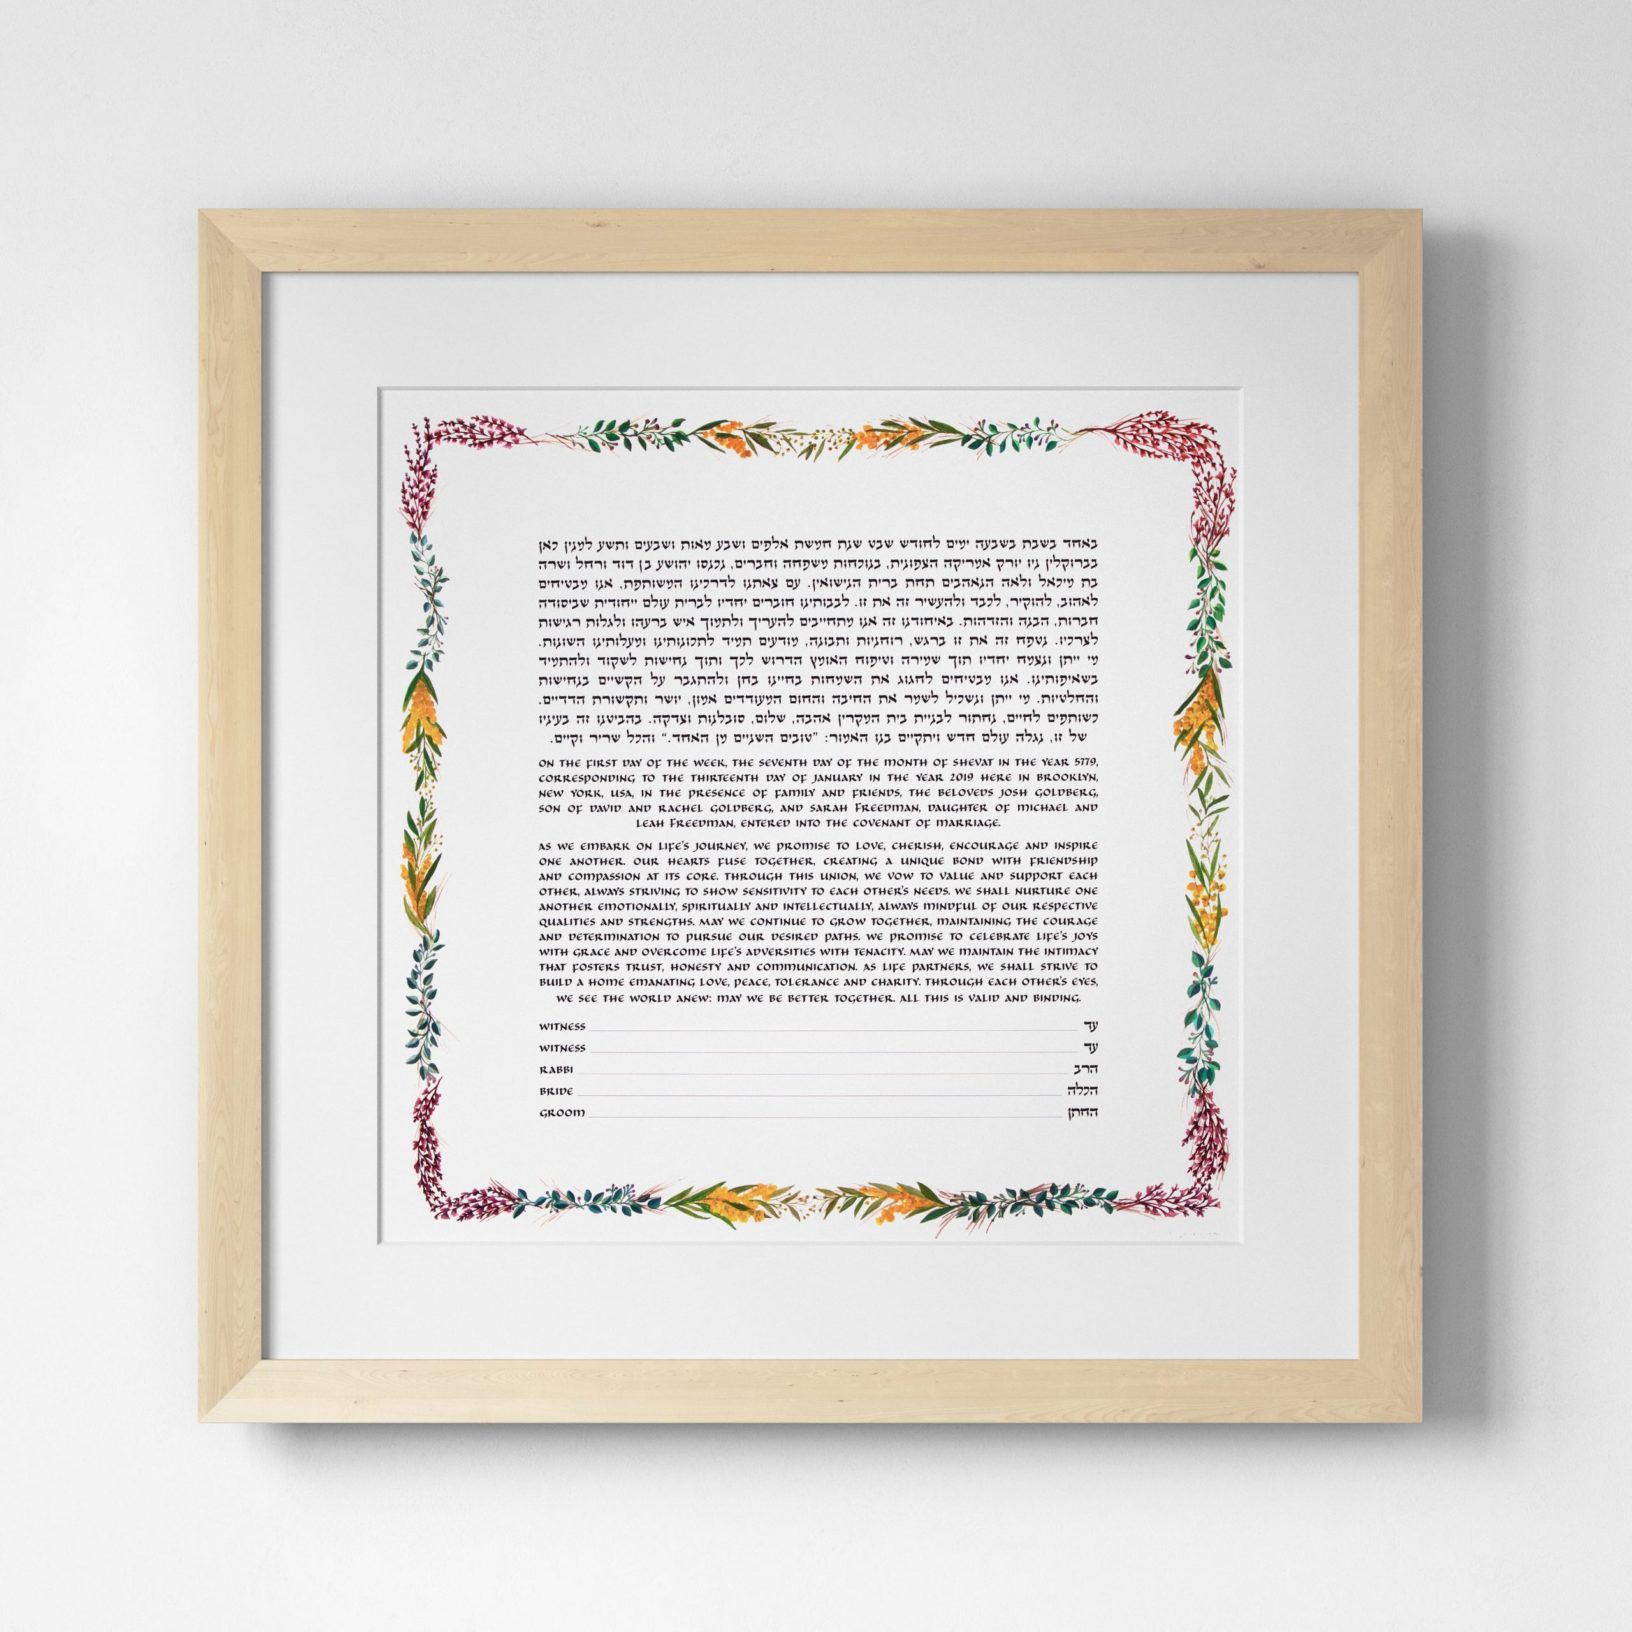 Witch Hazel And Eucalyptus Ketubah Jewish Marriage Contracts by Elyse Meyerson